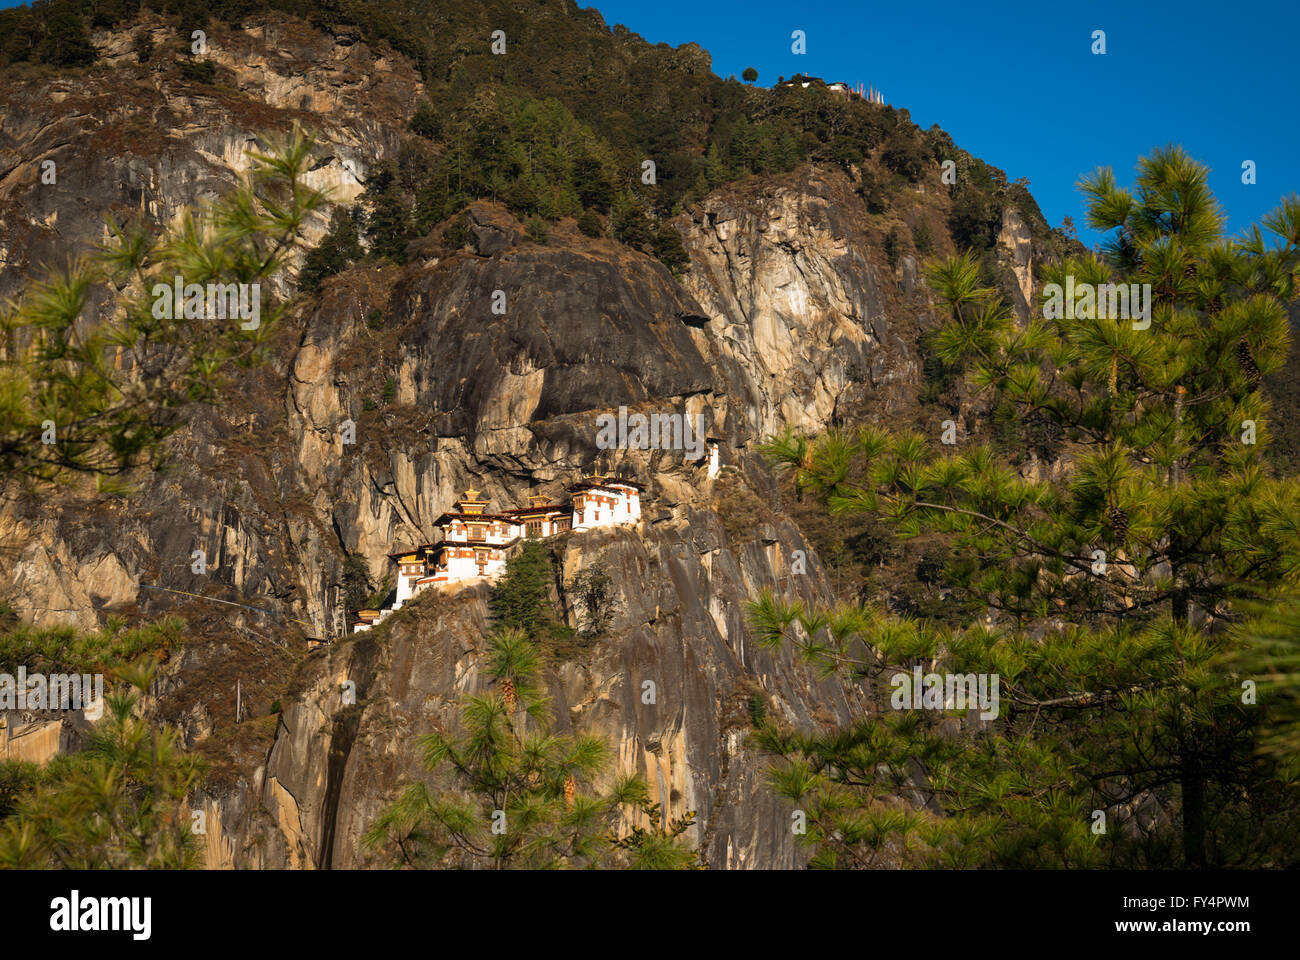 View through pine trees to Tiger's Nest (Taktshang) Monastery, perched on a cliff near Paro, Bhutan Stock Photo